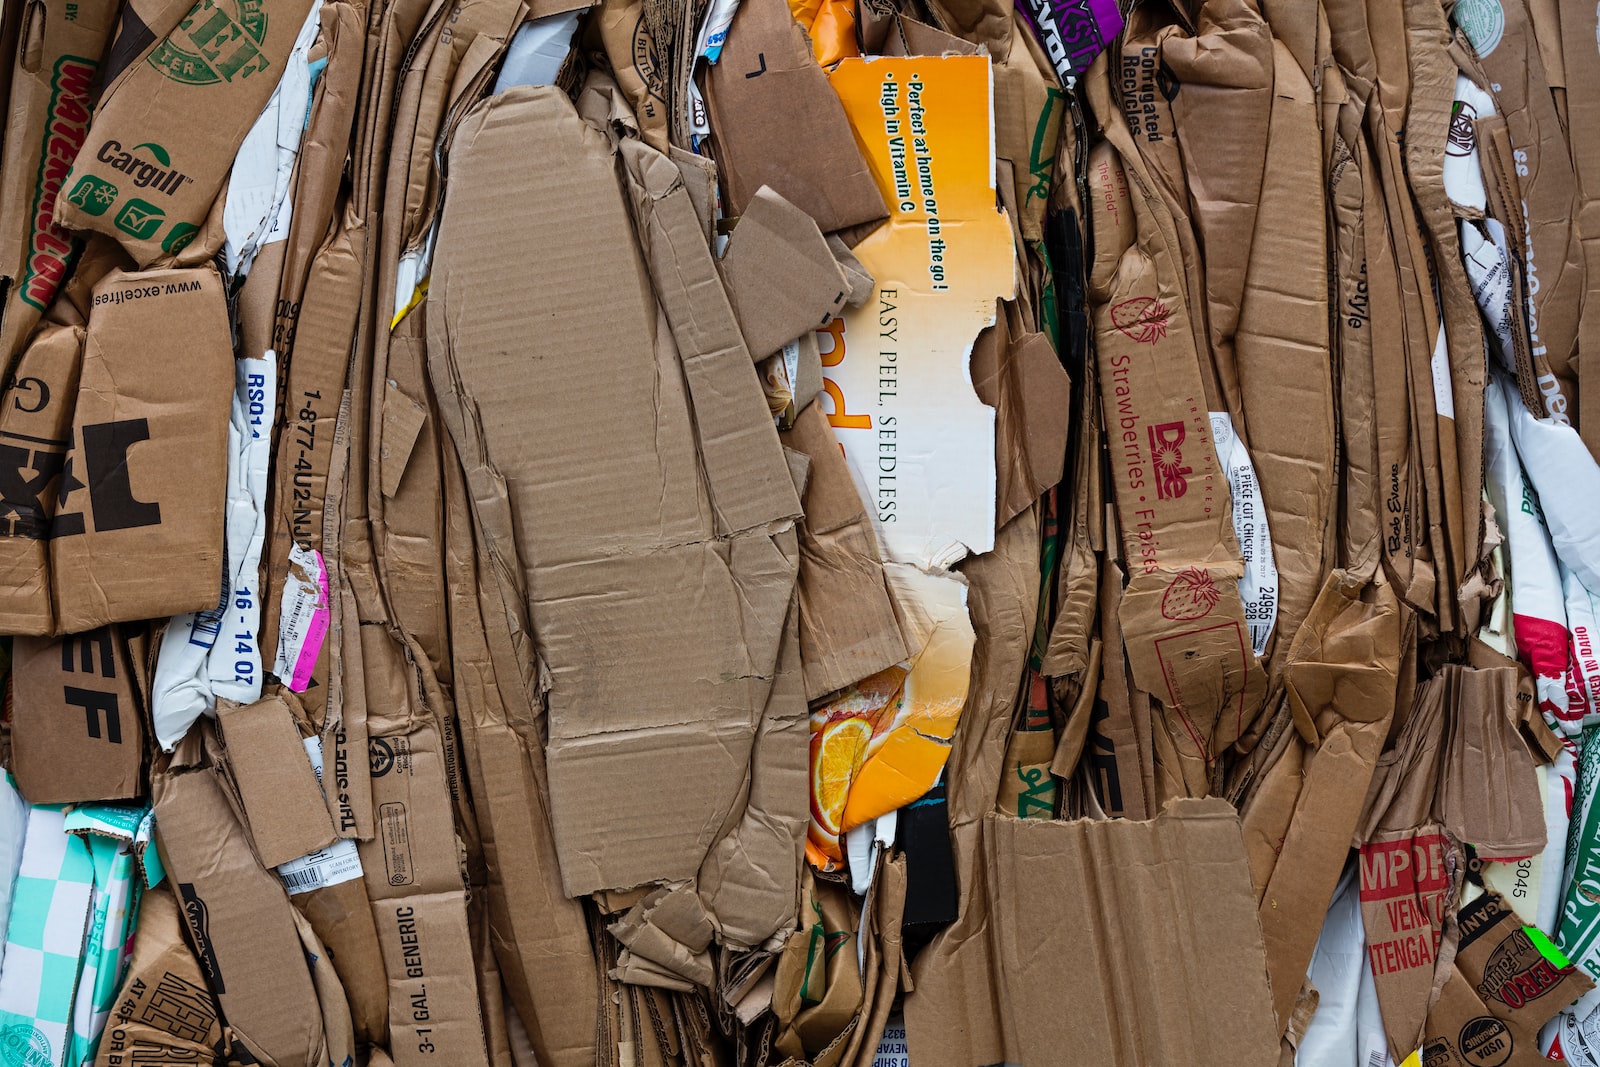 How Long Does It Take for Cardboard To Decompose?